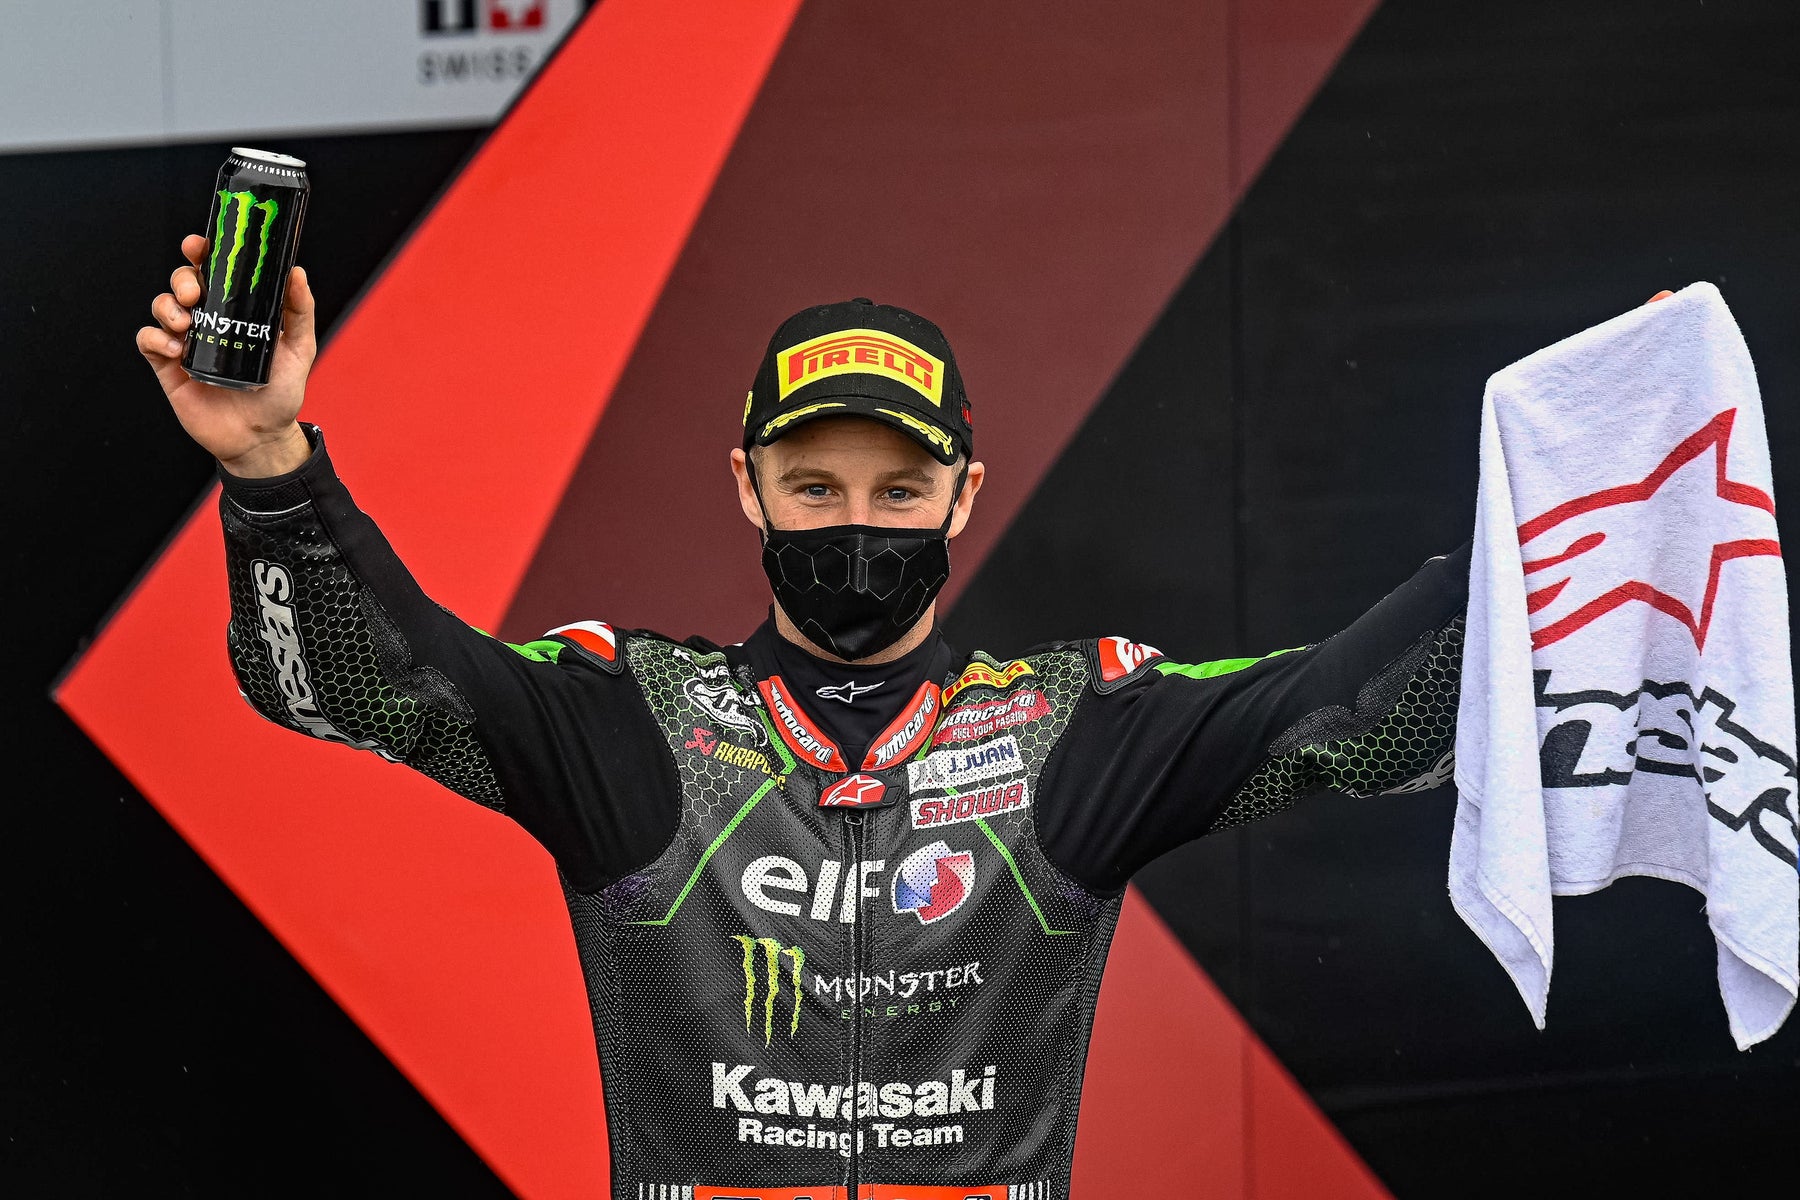 JONATHAN REA SHINES IN THE WET AT MAGNY COURS TO WIN WSBK SUPERPOLE RACE; MICHAEL VAN DER MARK THIRD